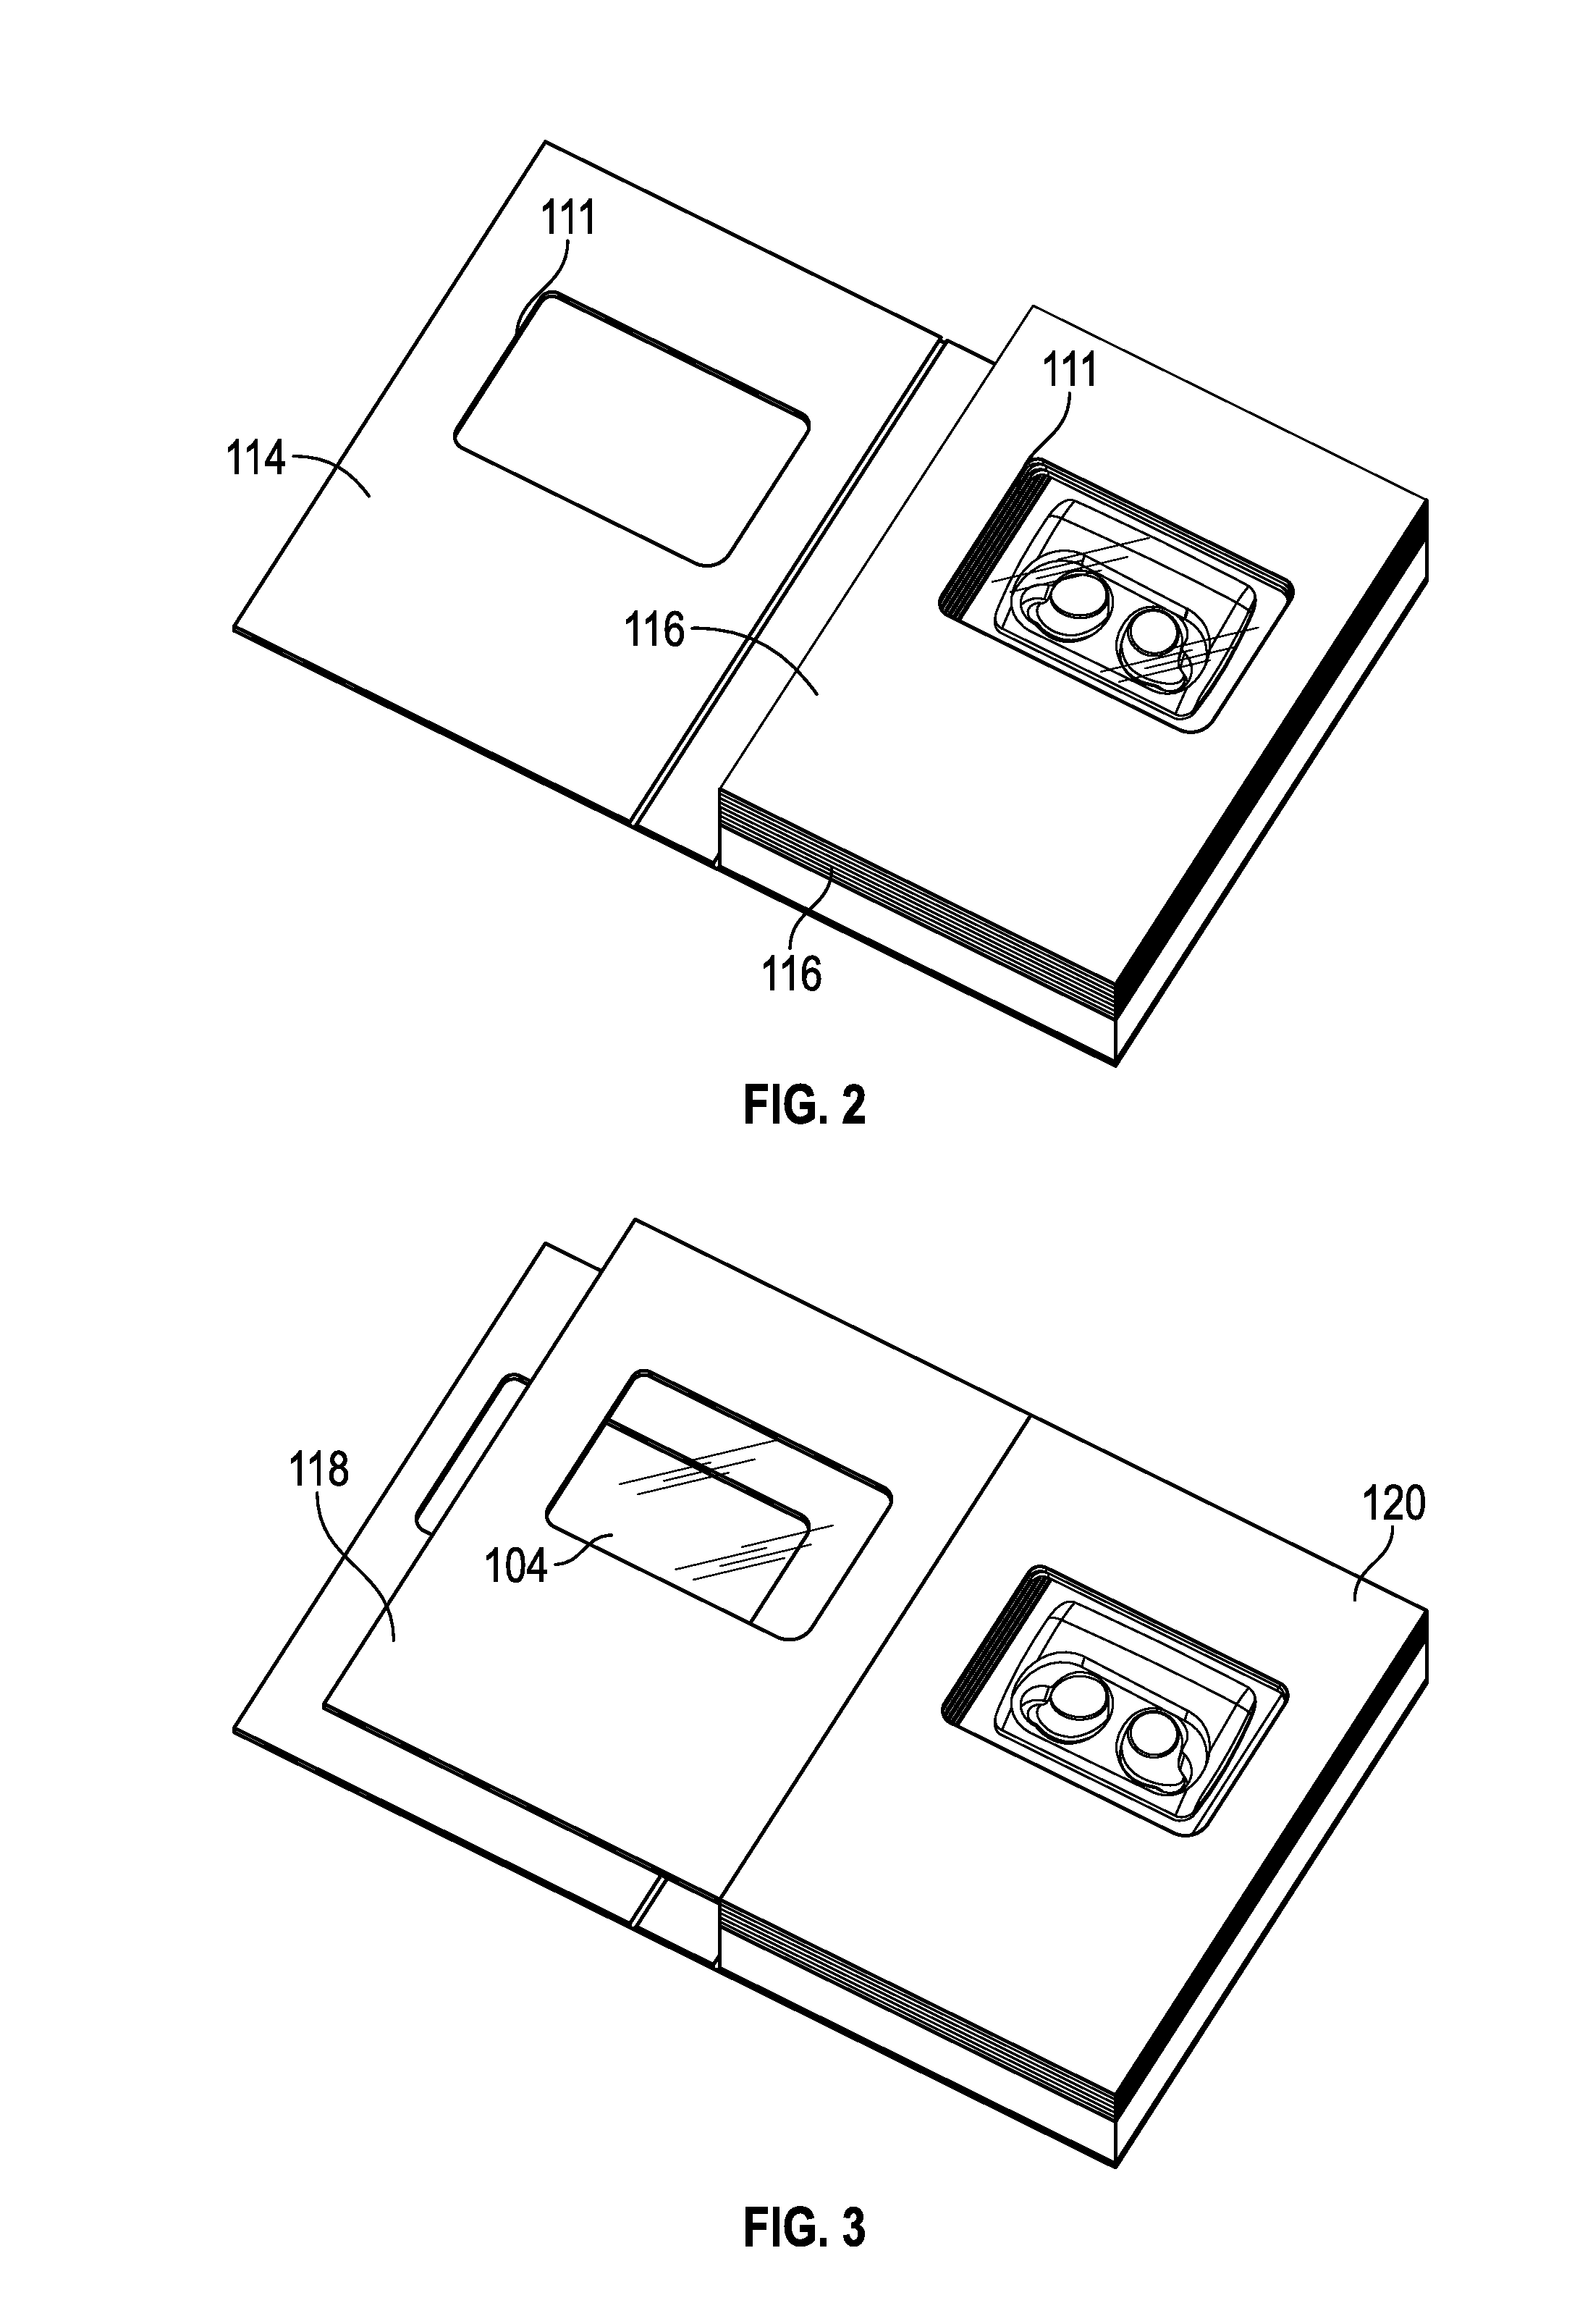 Interactive Product Packaging System and Method